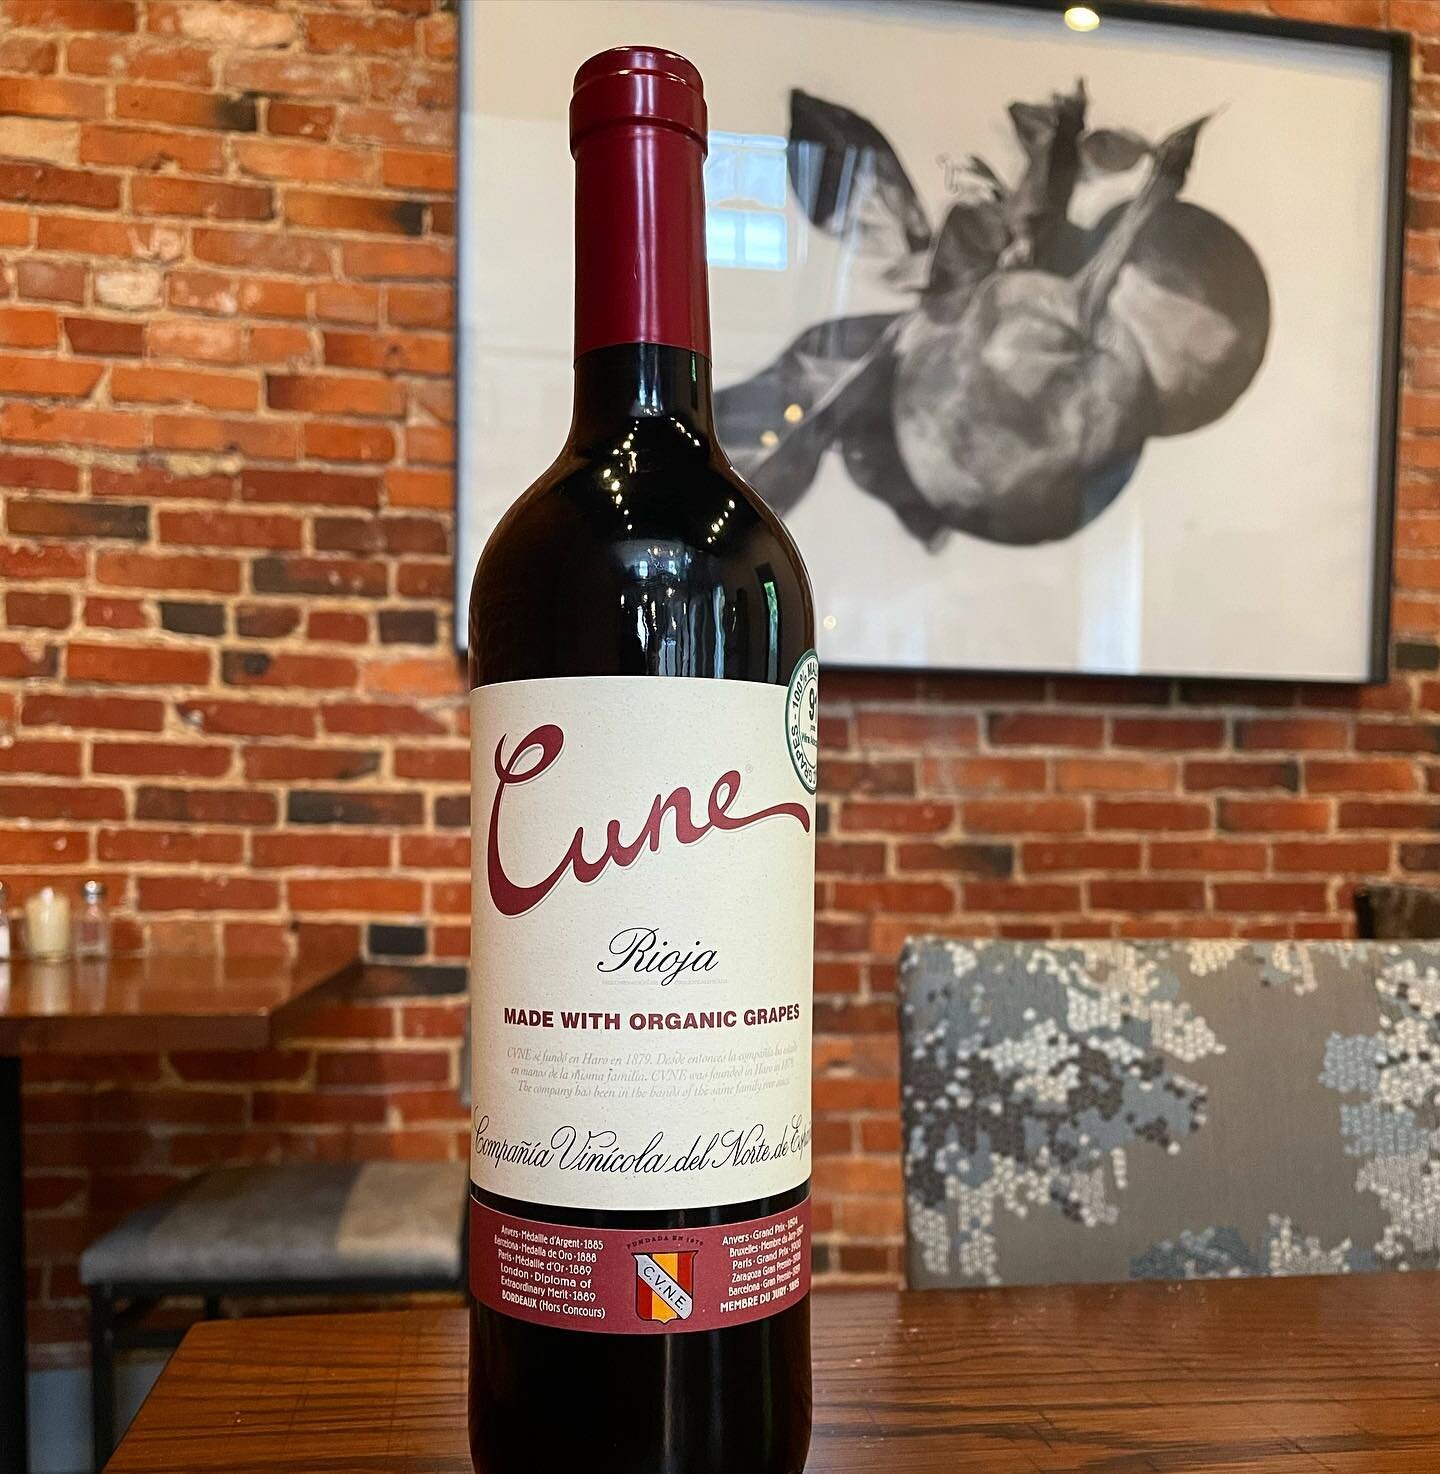 Don&rsquo;t forget Wednesday is 25% off all bottled #wine, including this #beautiful Rioja from Spain!

#joinus for #delicious wine anytime #hagerstownmd